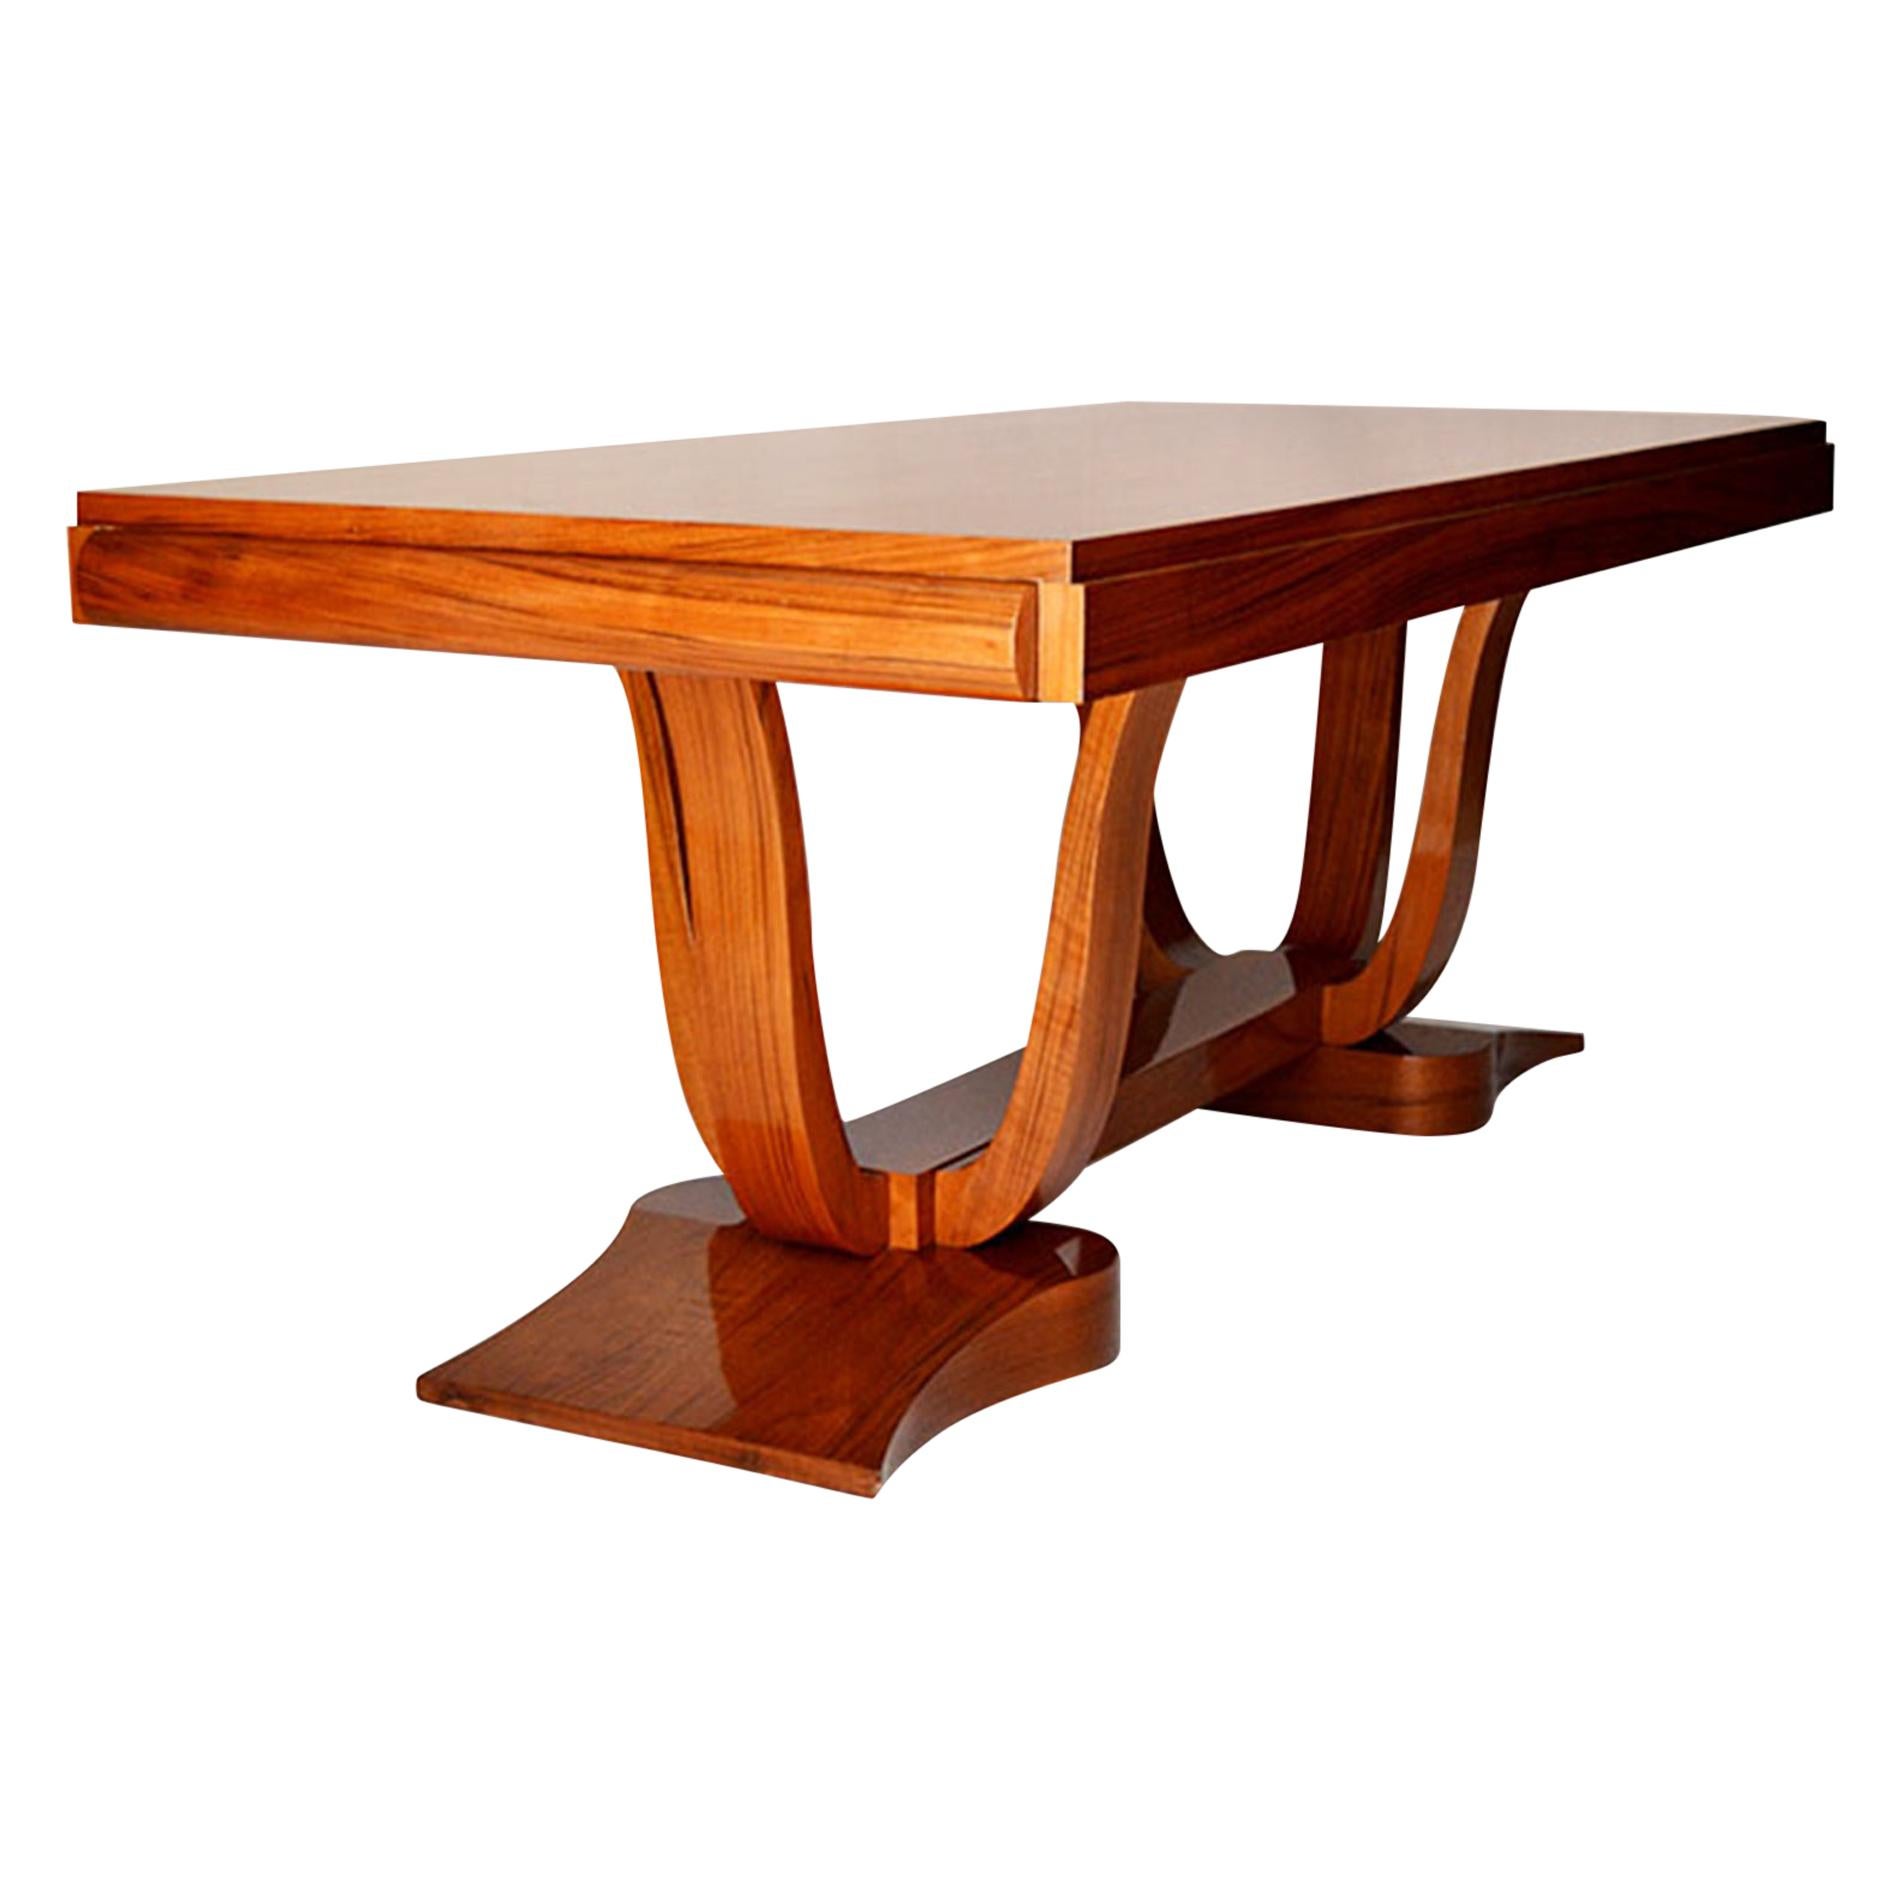 Large Extensible Art Deco Table in French Walnut Wood, 1930s, France For Sale